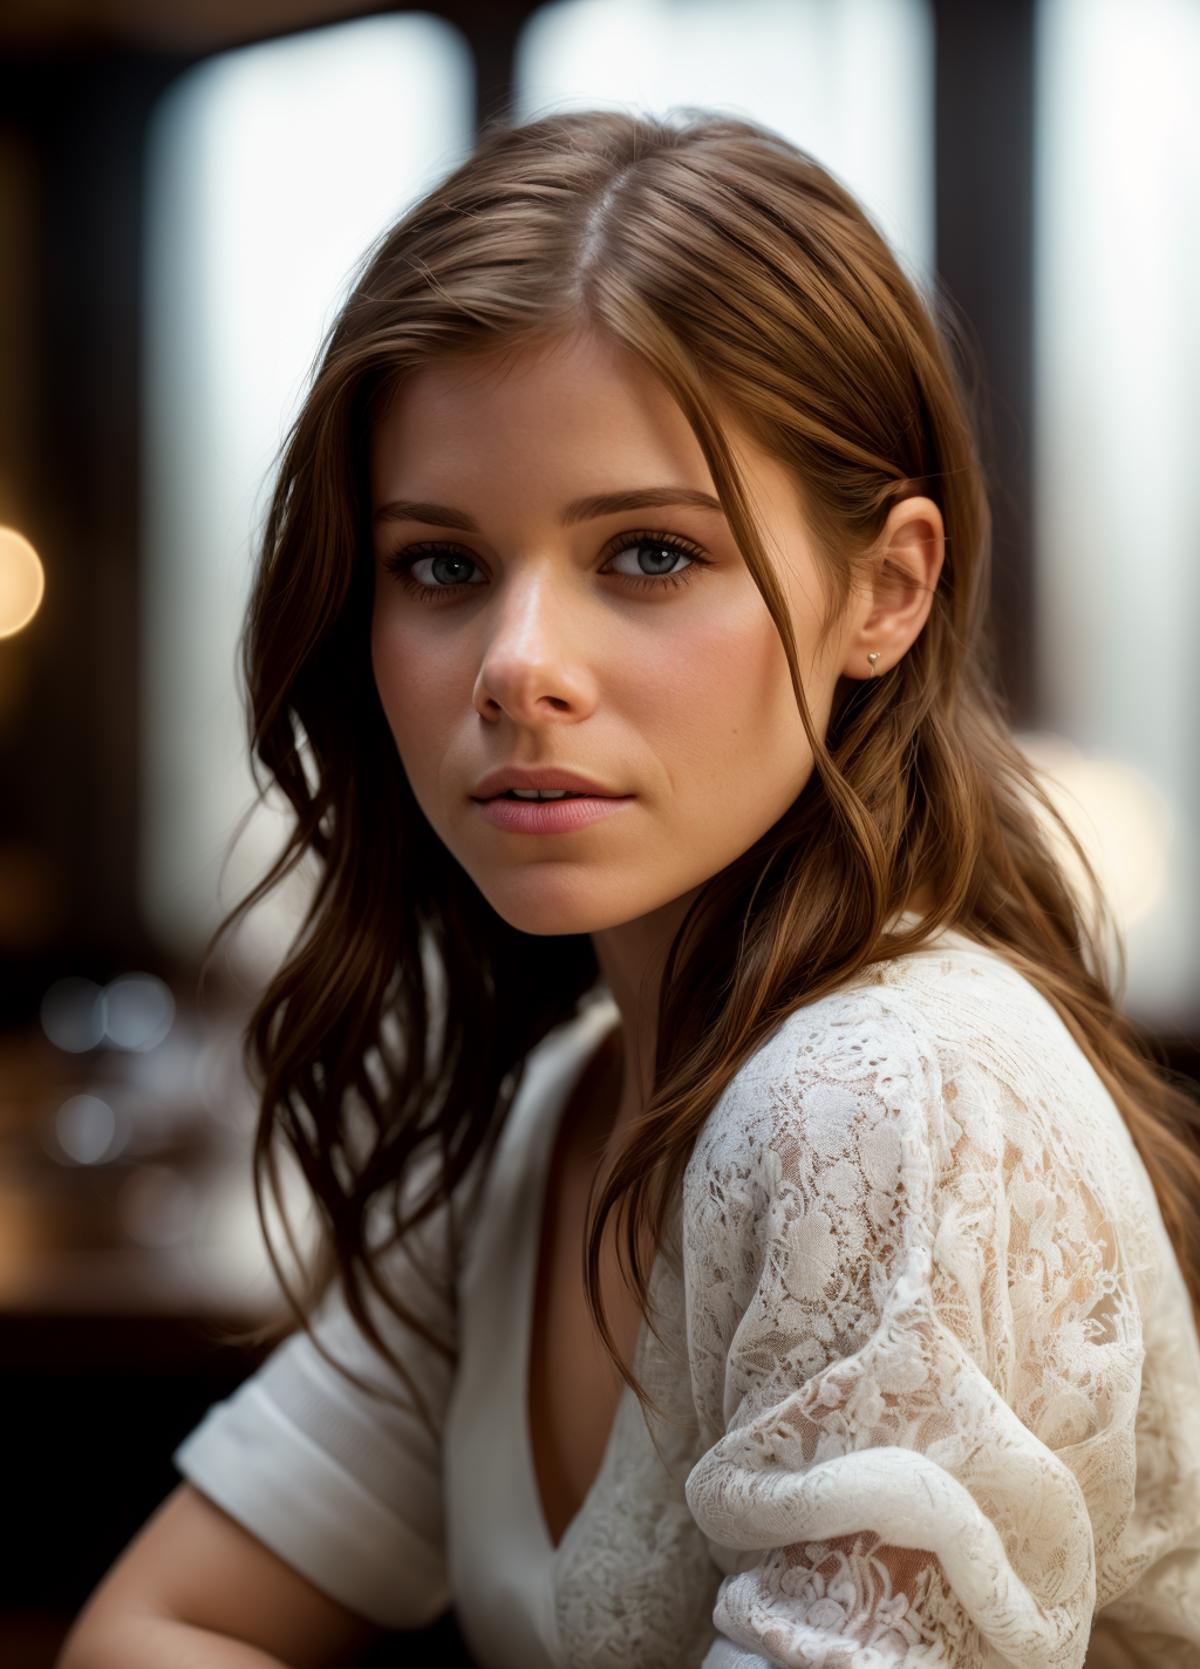 Kate Mara image by WillieF